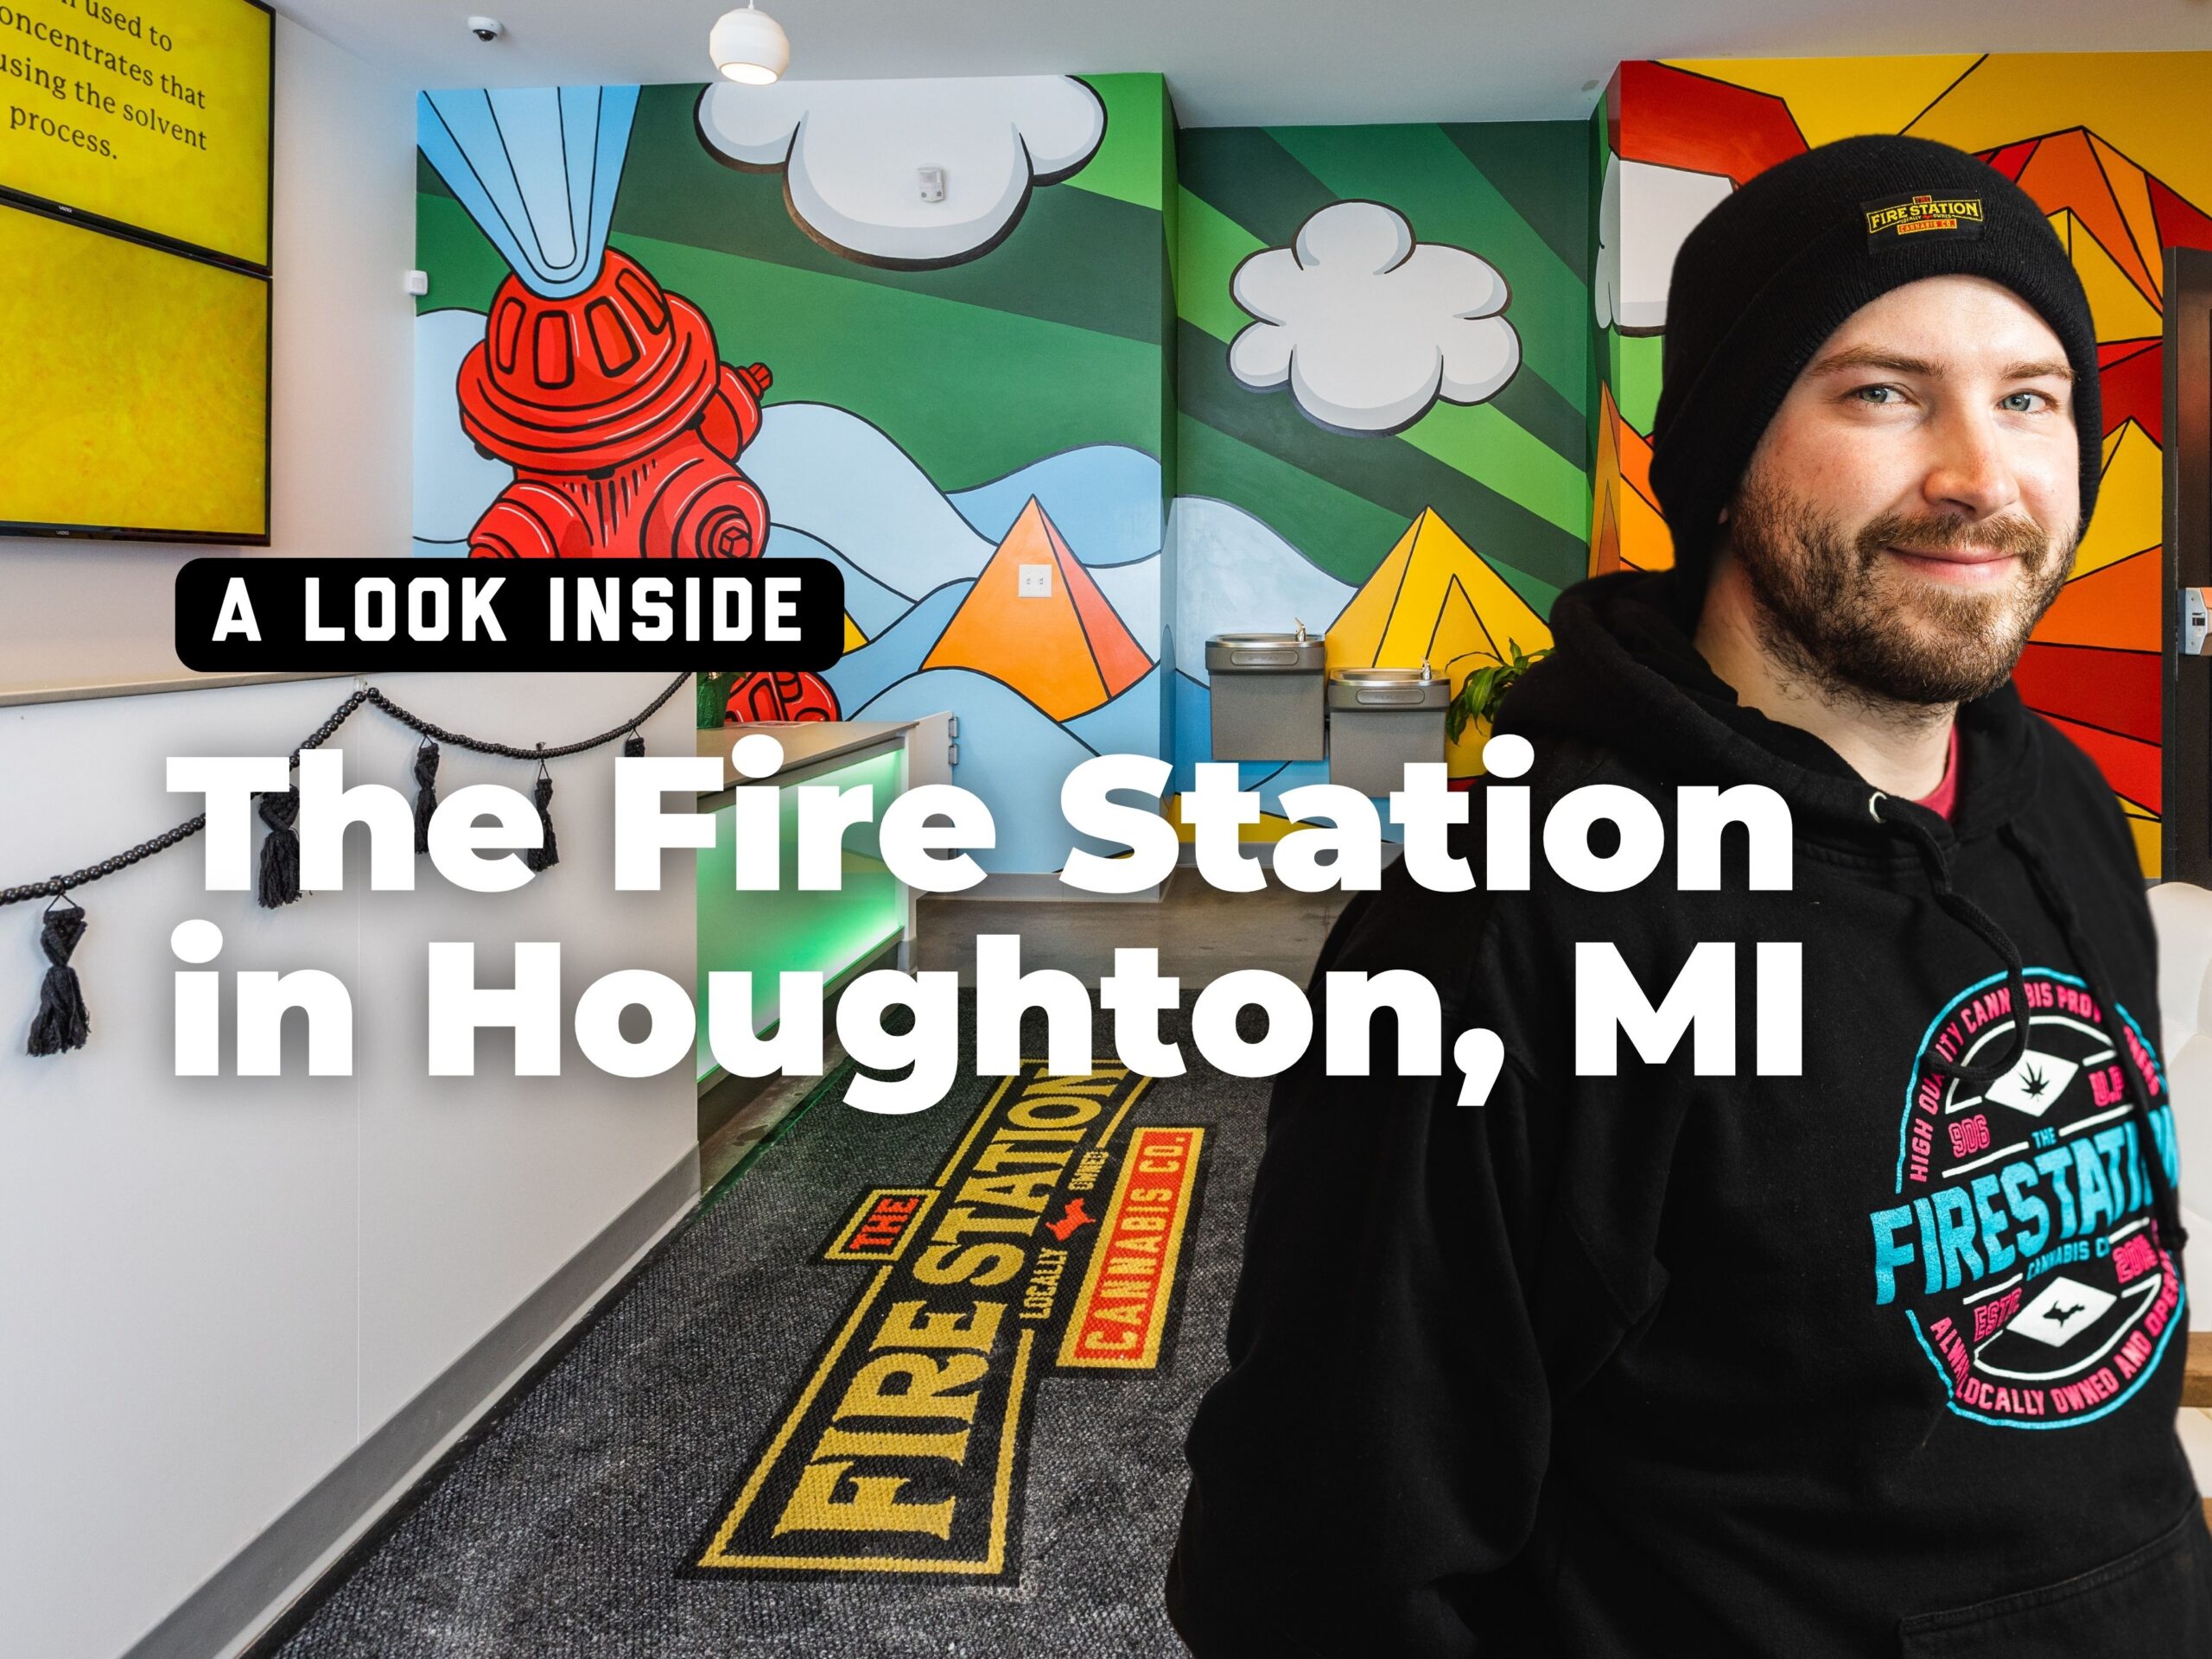 A Look Inside The Fire Station Cannabis Co. in Houghton, Michigan. TFS is a Michigan-based cannabis dispensary.